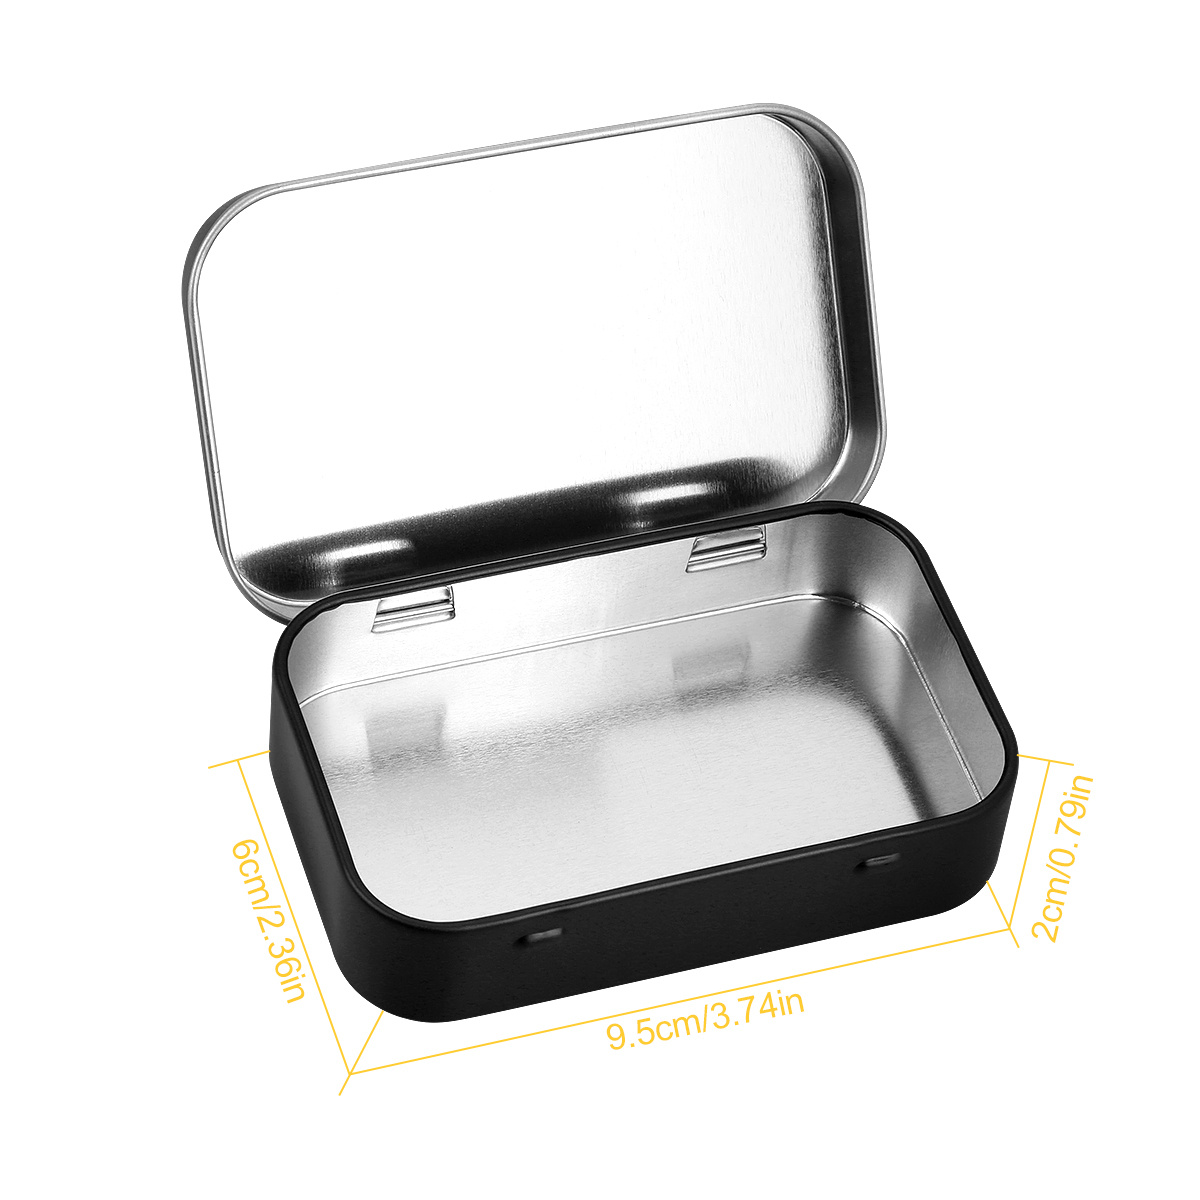 4pcs Tin Box Containers Metal Tins Storage Box with Lids Home